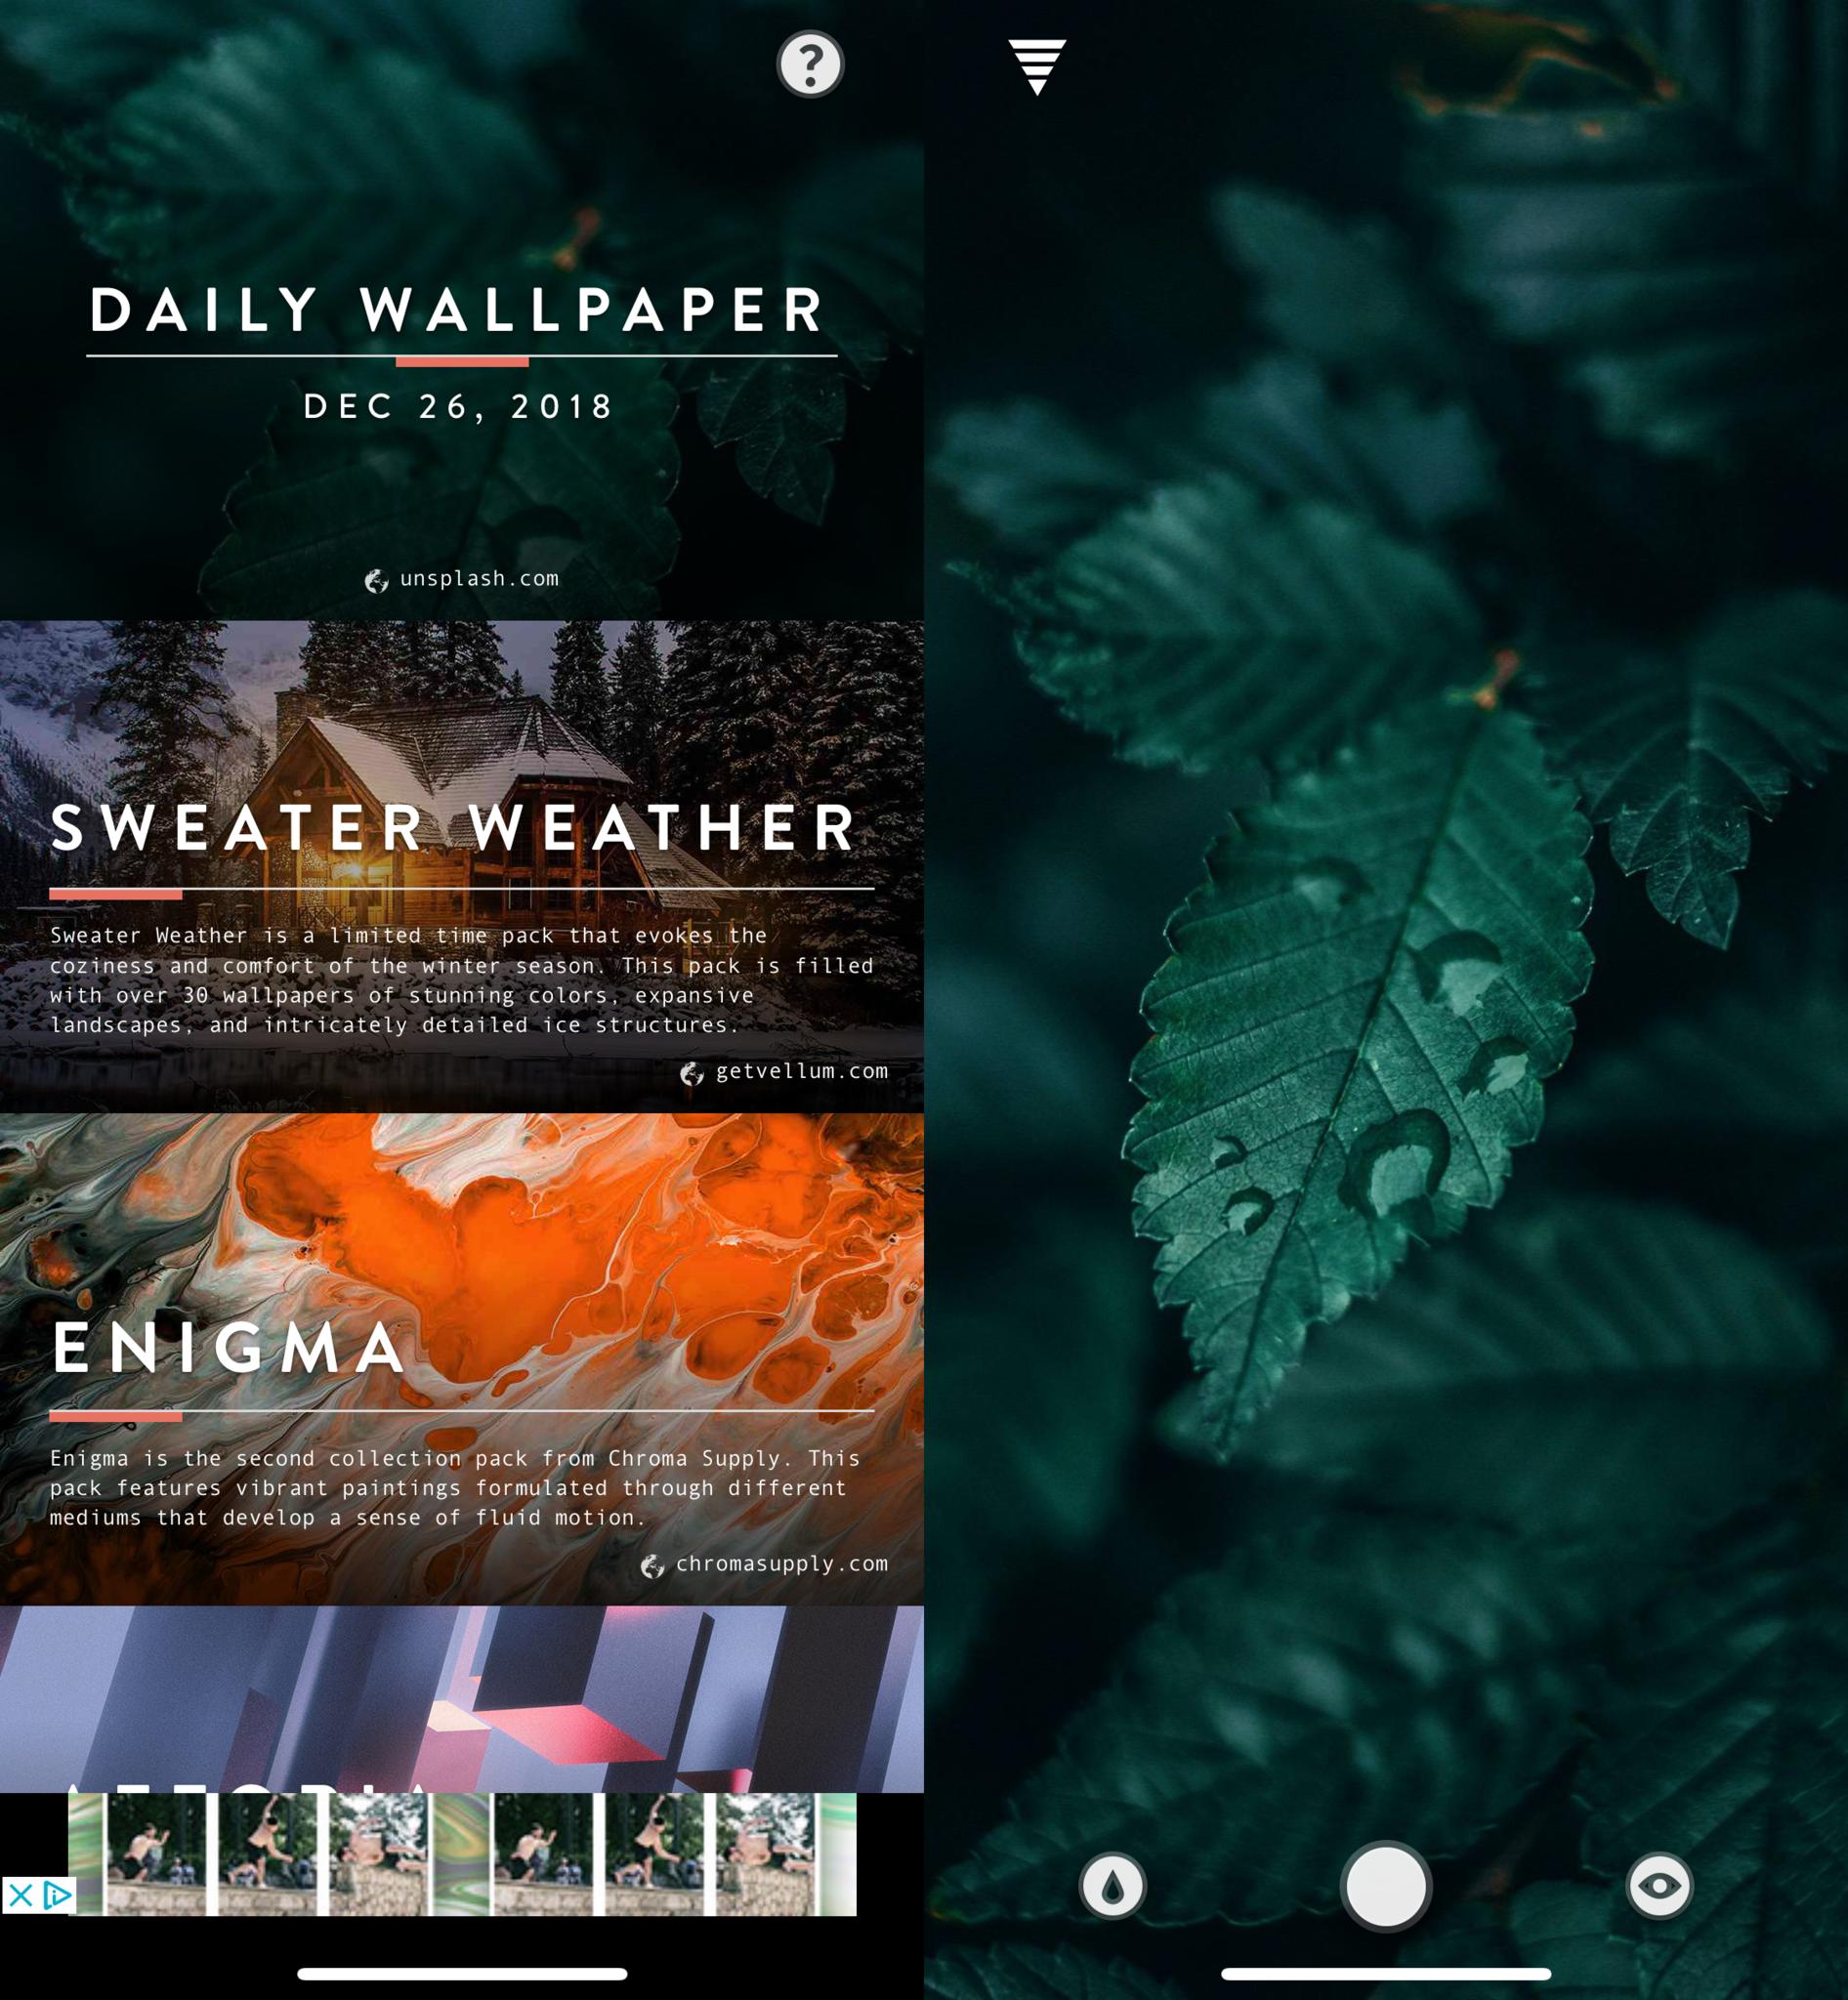 Best wallpaper apps for iPhone and iPad